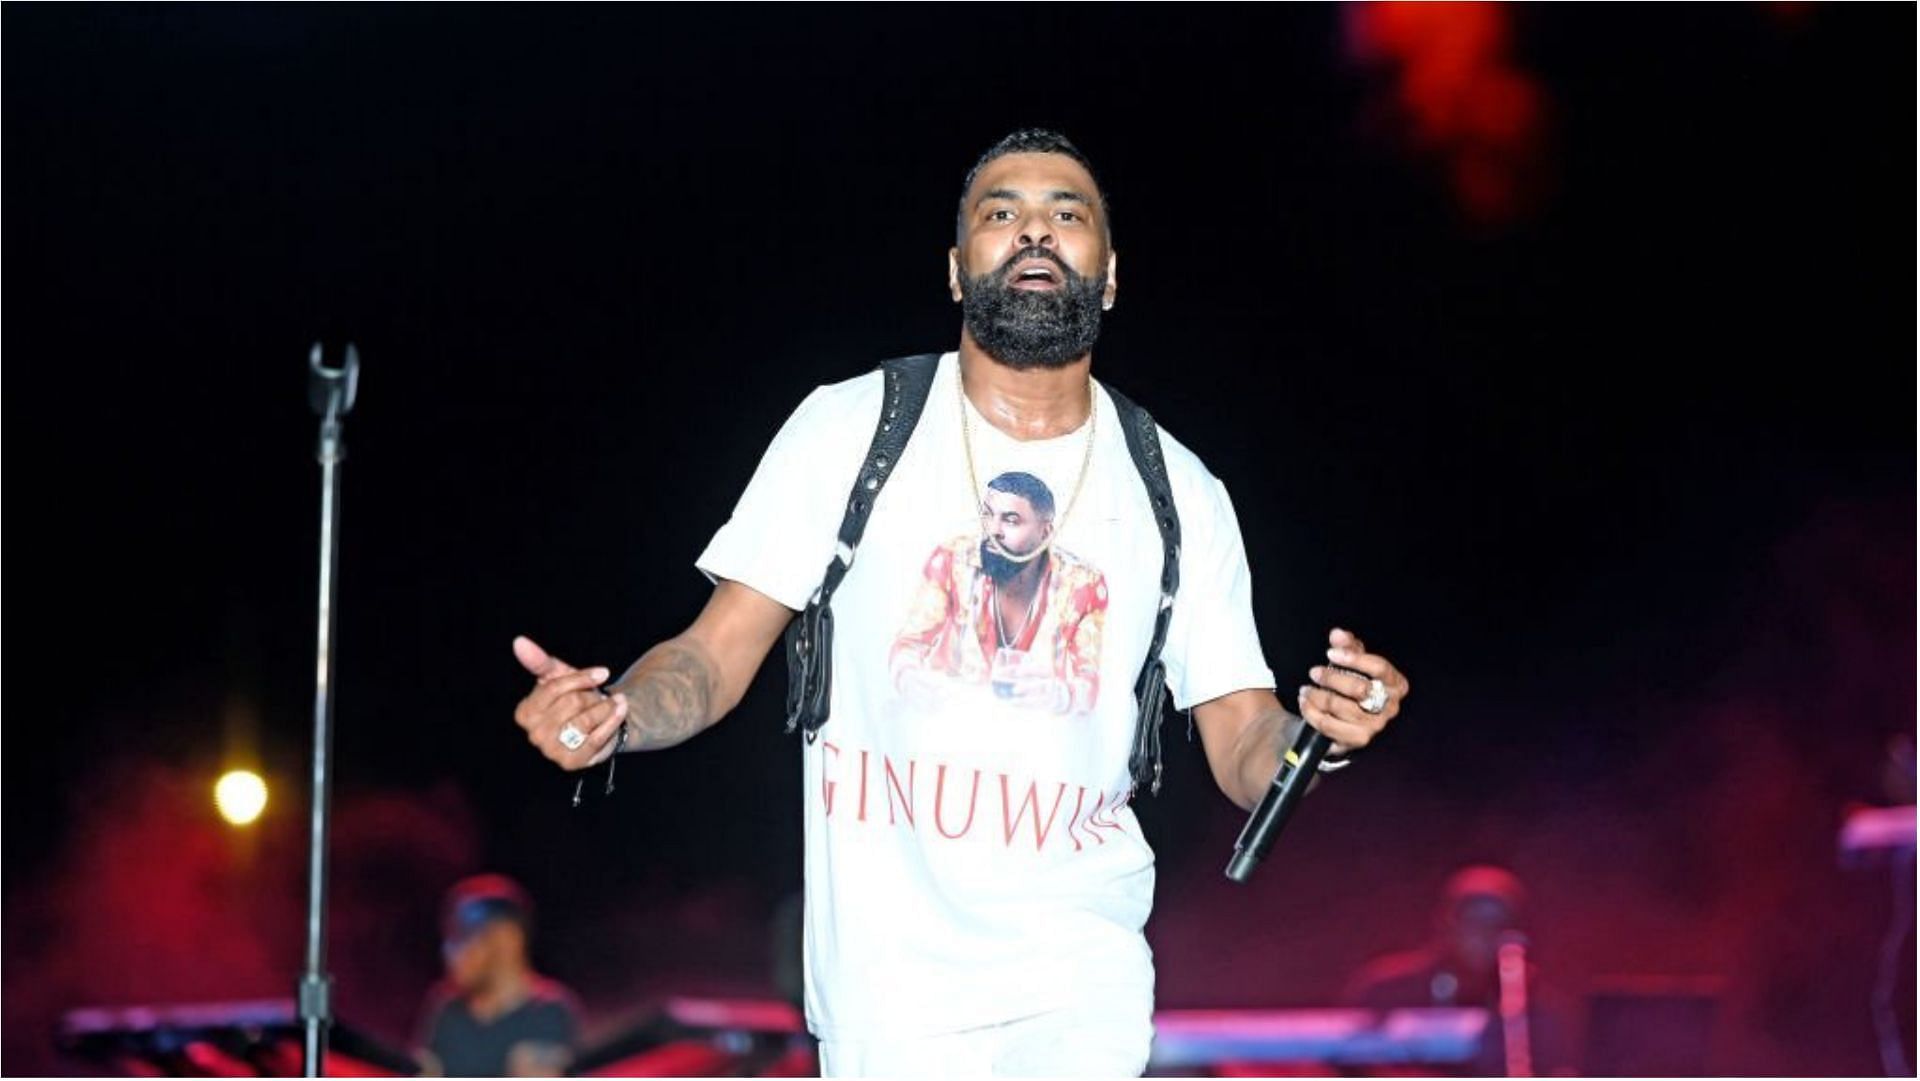 Ginuwine gave an update on his health after reports of him passing out went viral (Image via Stephen J. Cohen/Getty Images)